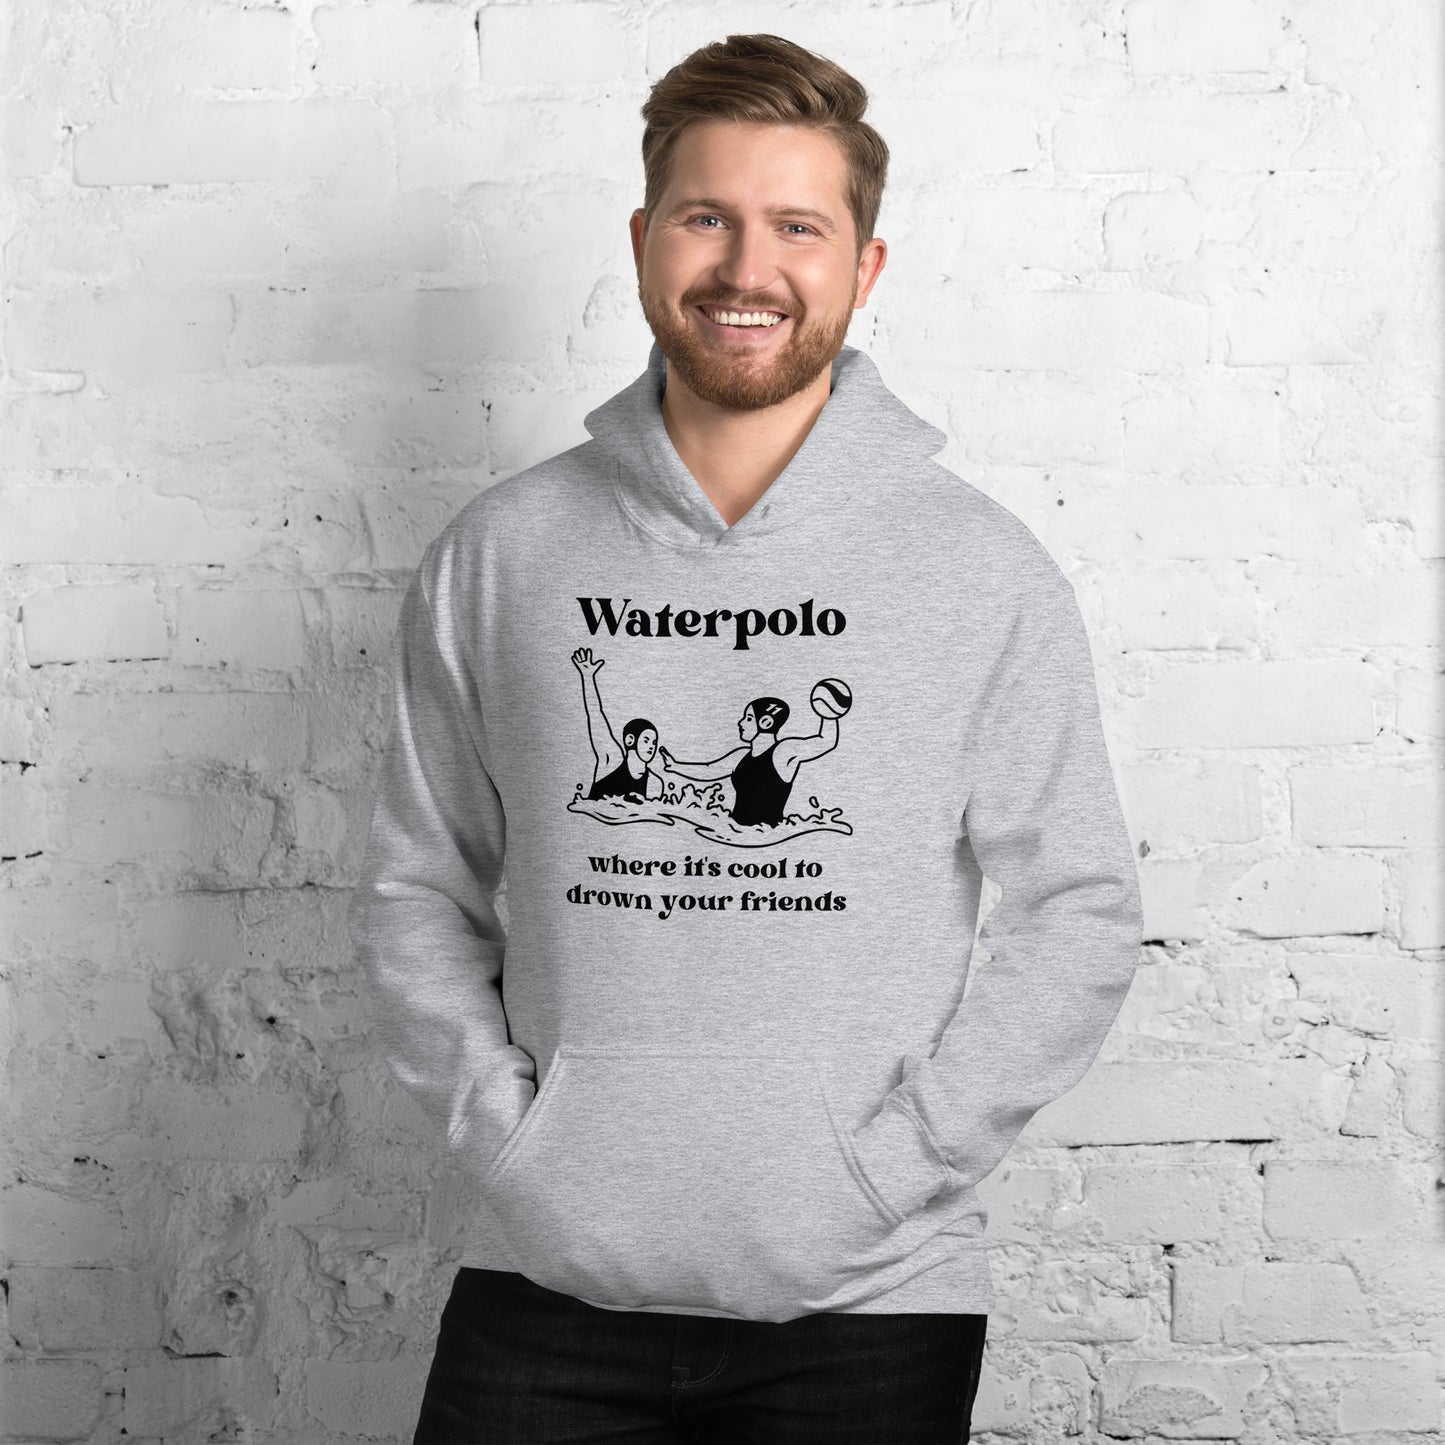 Waterpolo, where it's cool to drown your friends - Unisex Heavy Blend Hoodie - Gildan 18500